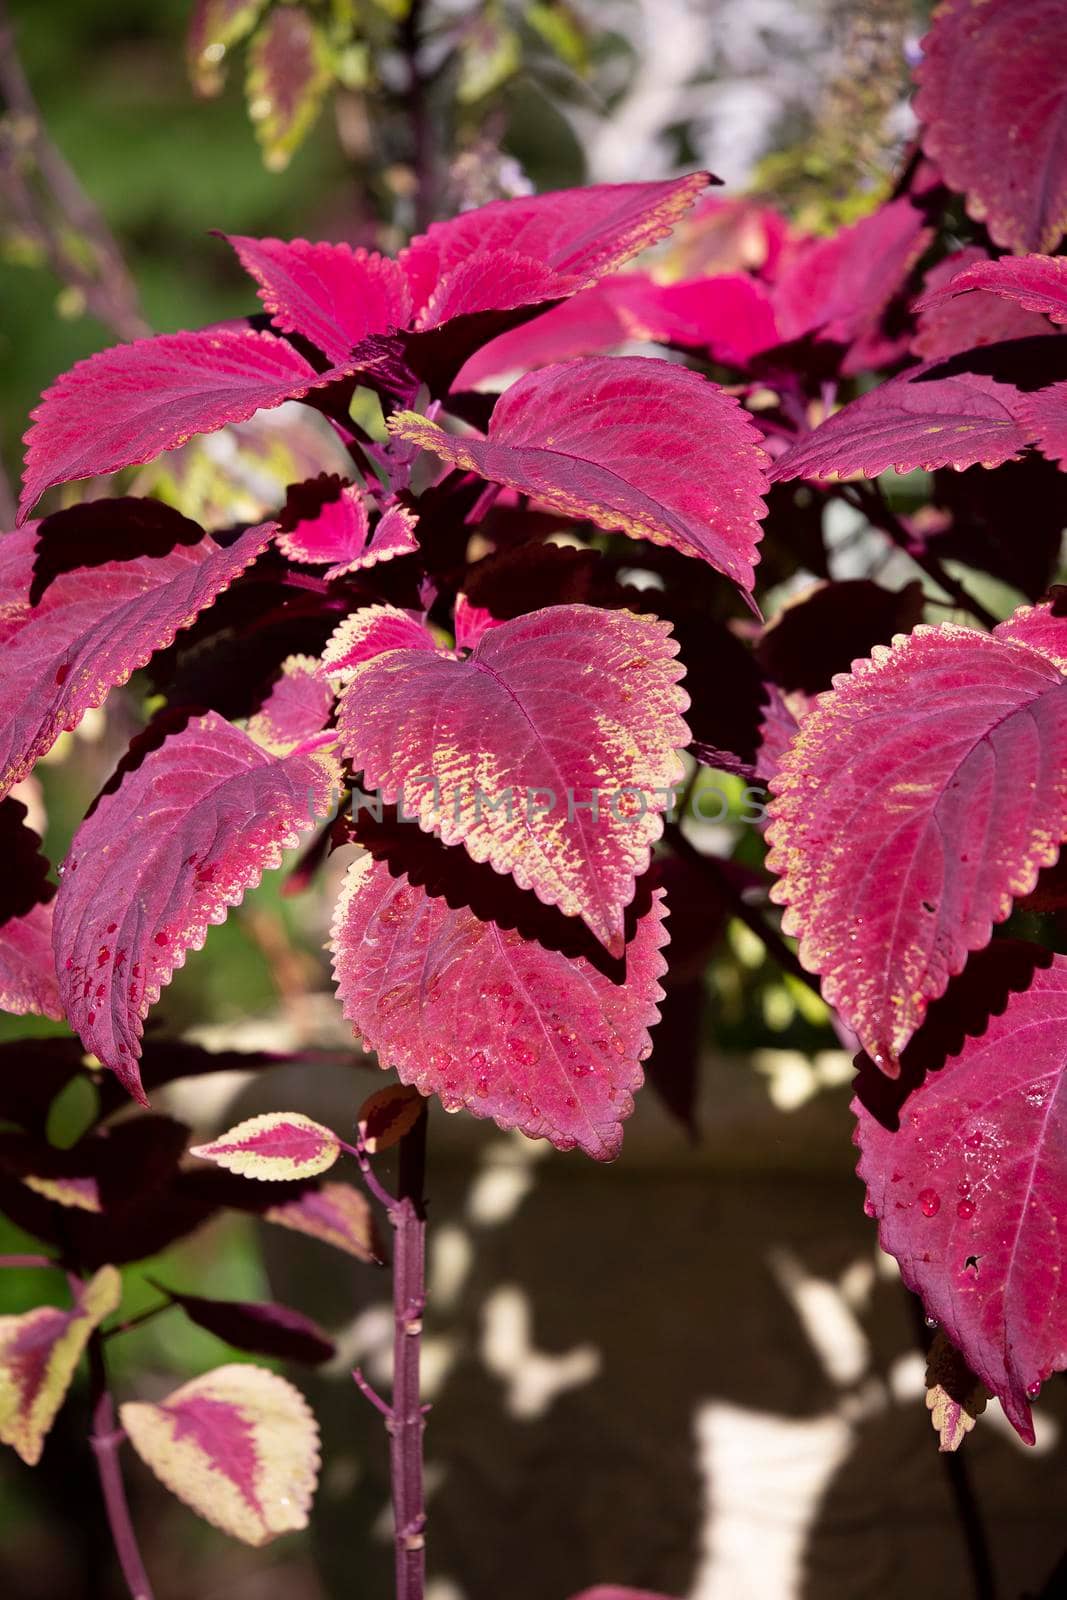 Leaves of a Coleus Plant by tornado98